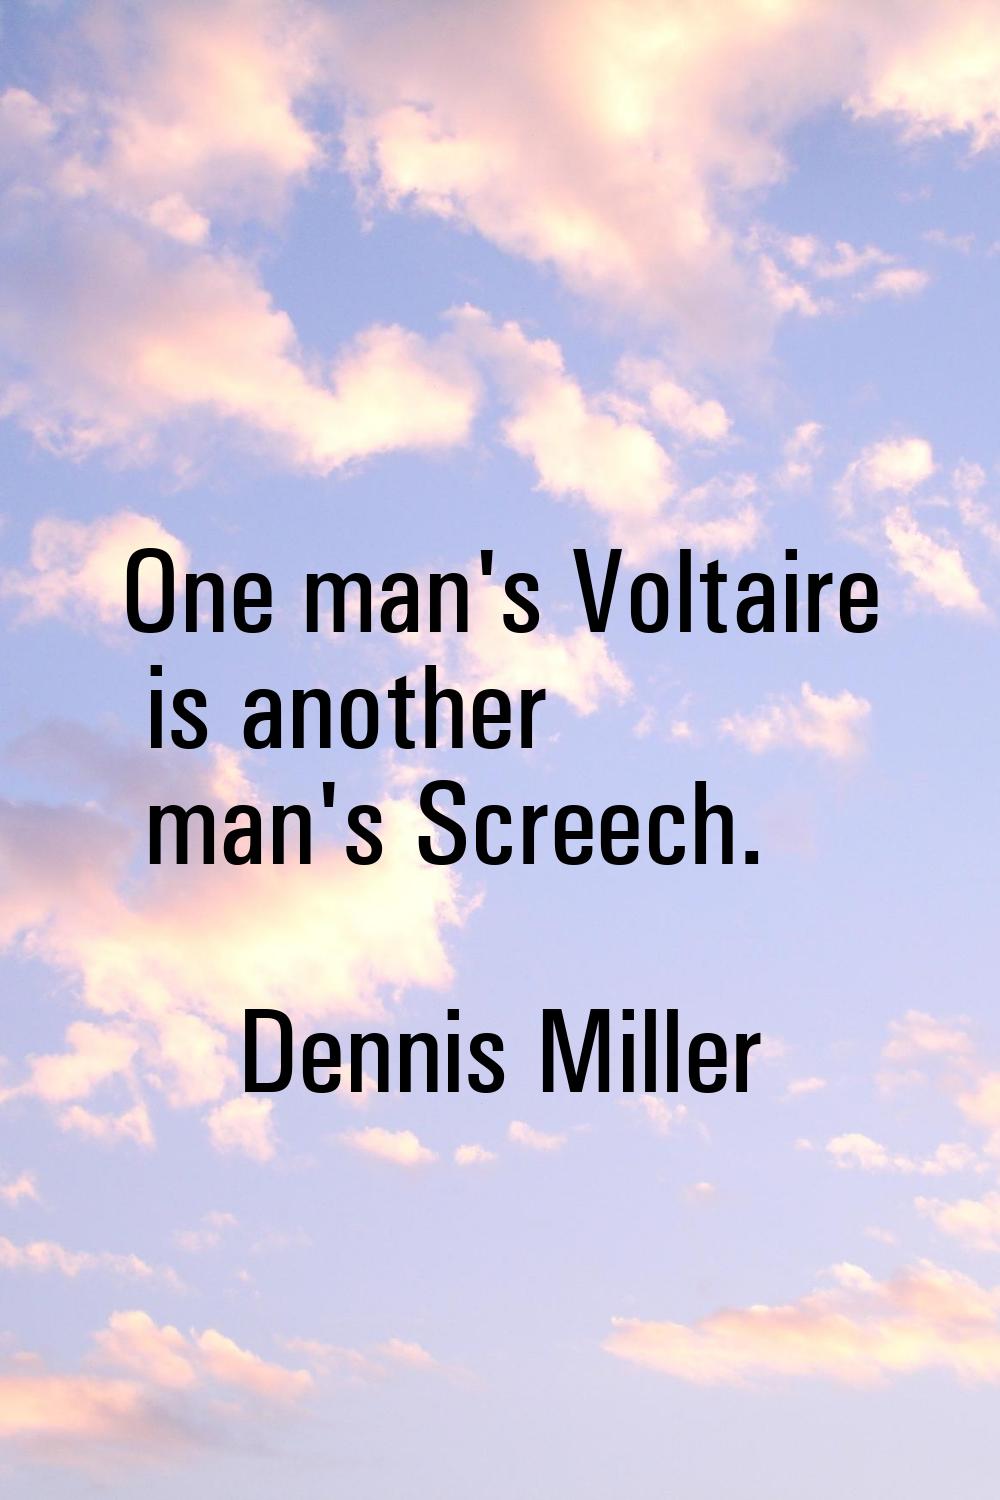 One man's Voltaire is another man's Screech.